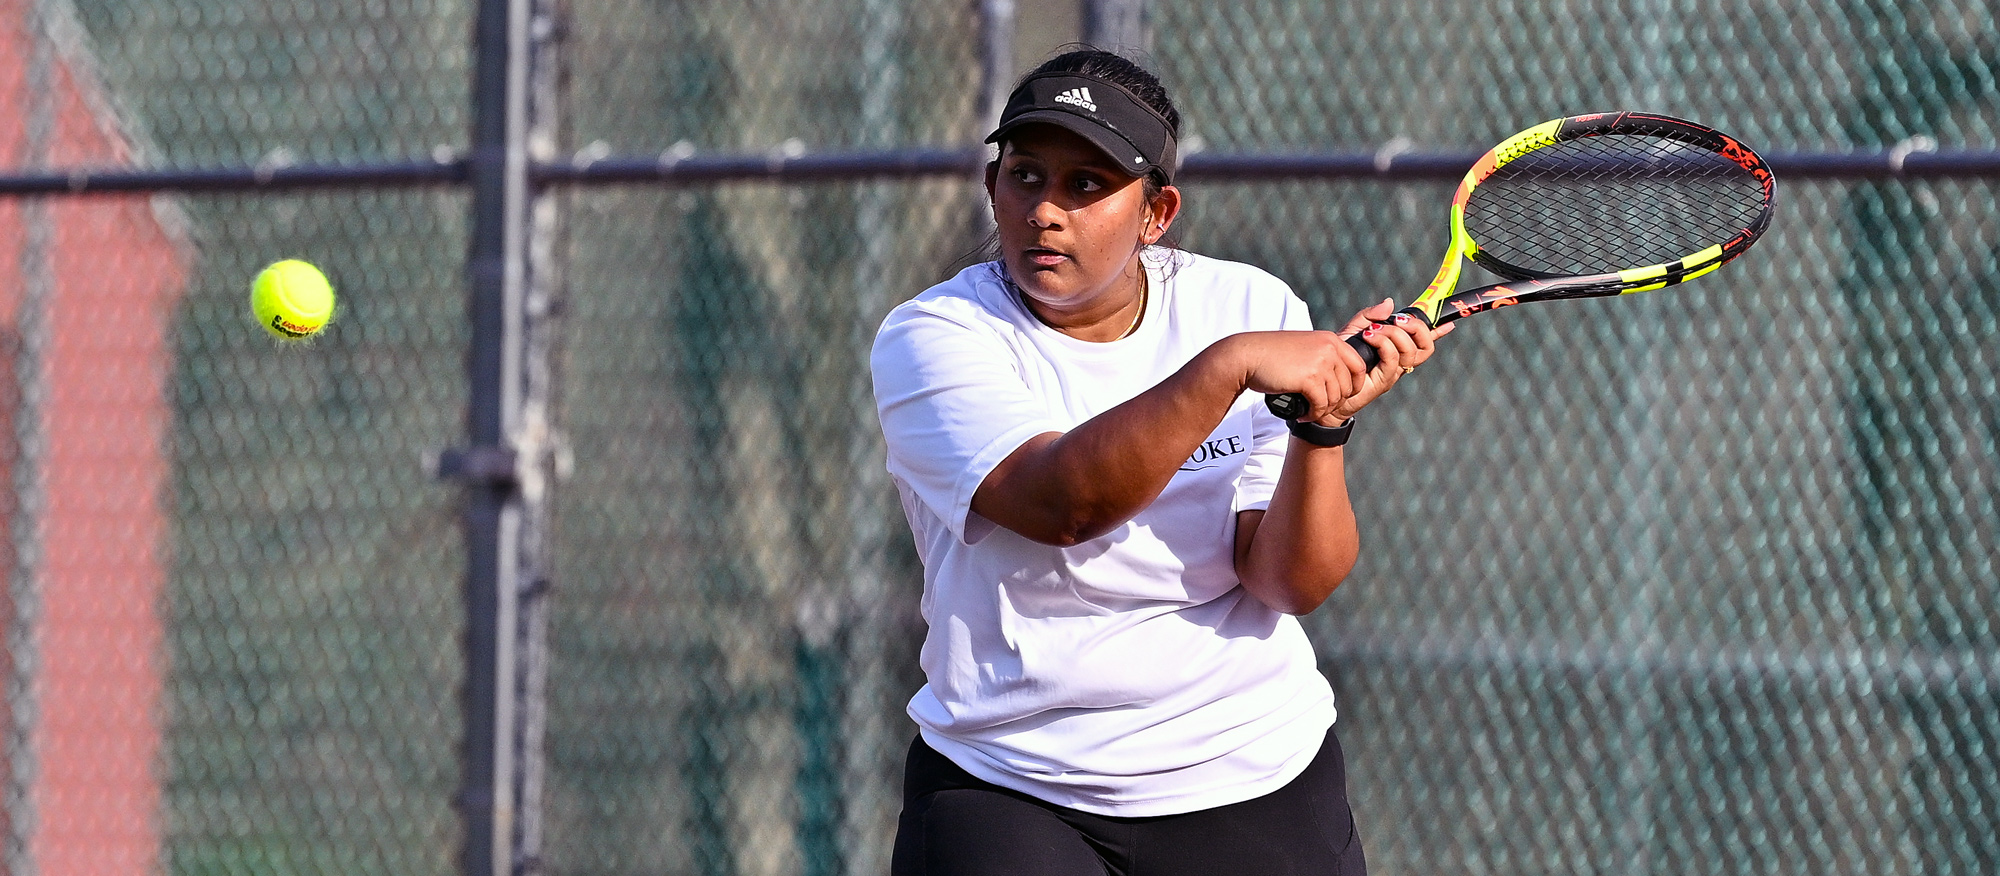 Senior captain Shweta Kiran Cavale ended her Mount Holyoke tennis career in the Lyons' NEWMAC playoff loss at Wellesley on April 25, 2023. (RJB Sports file photo)